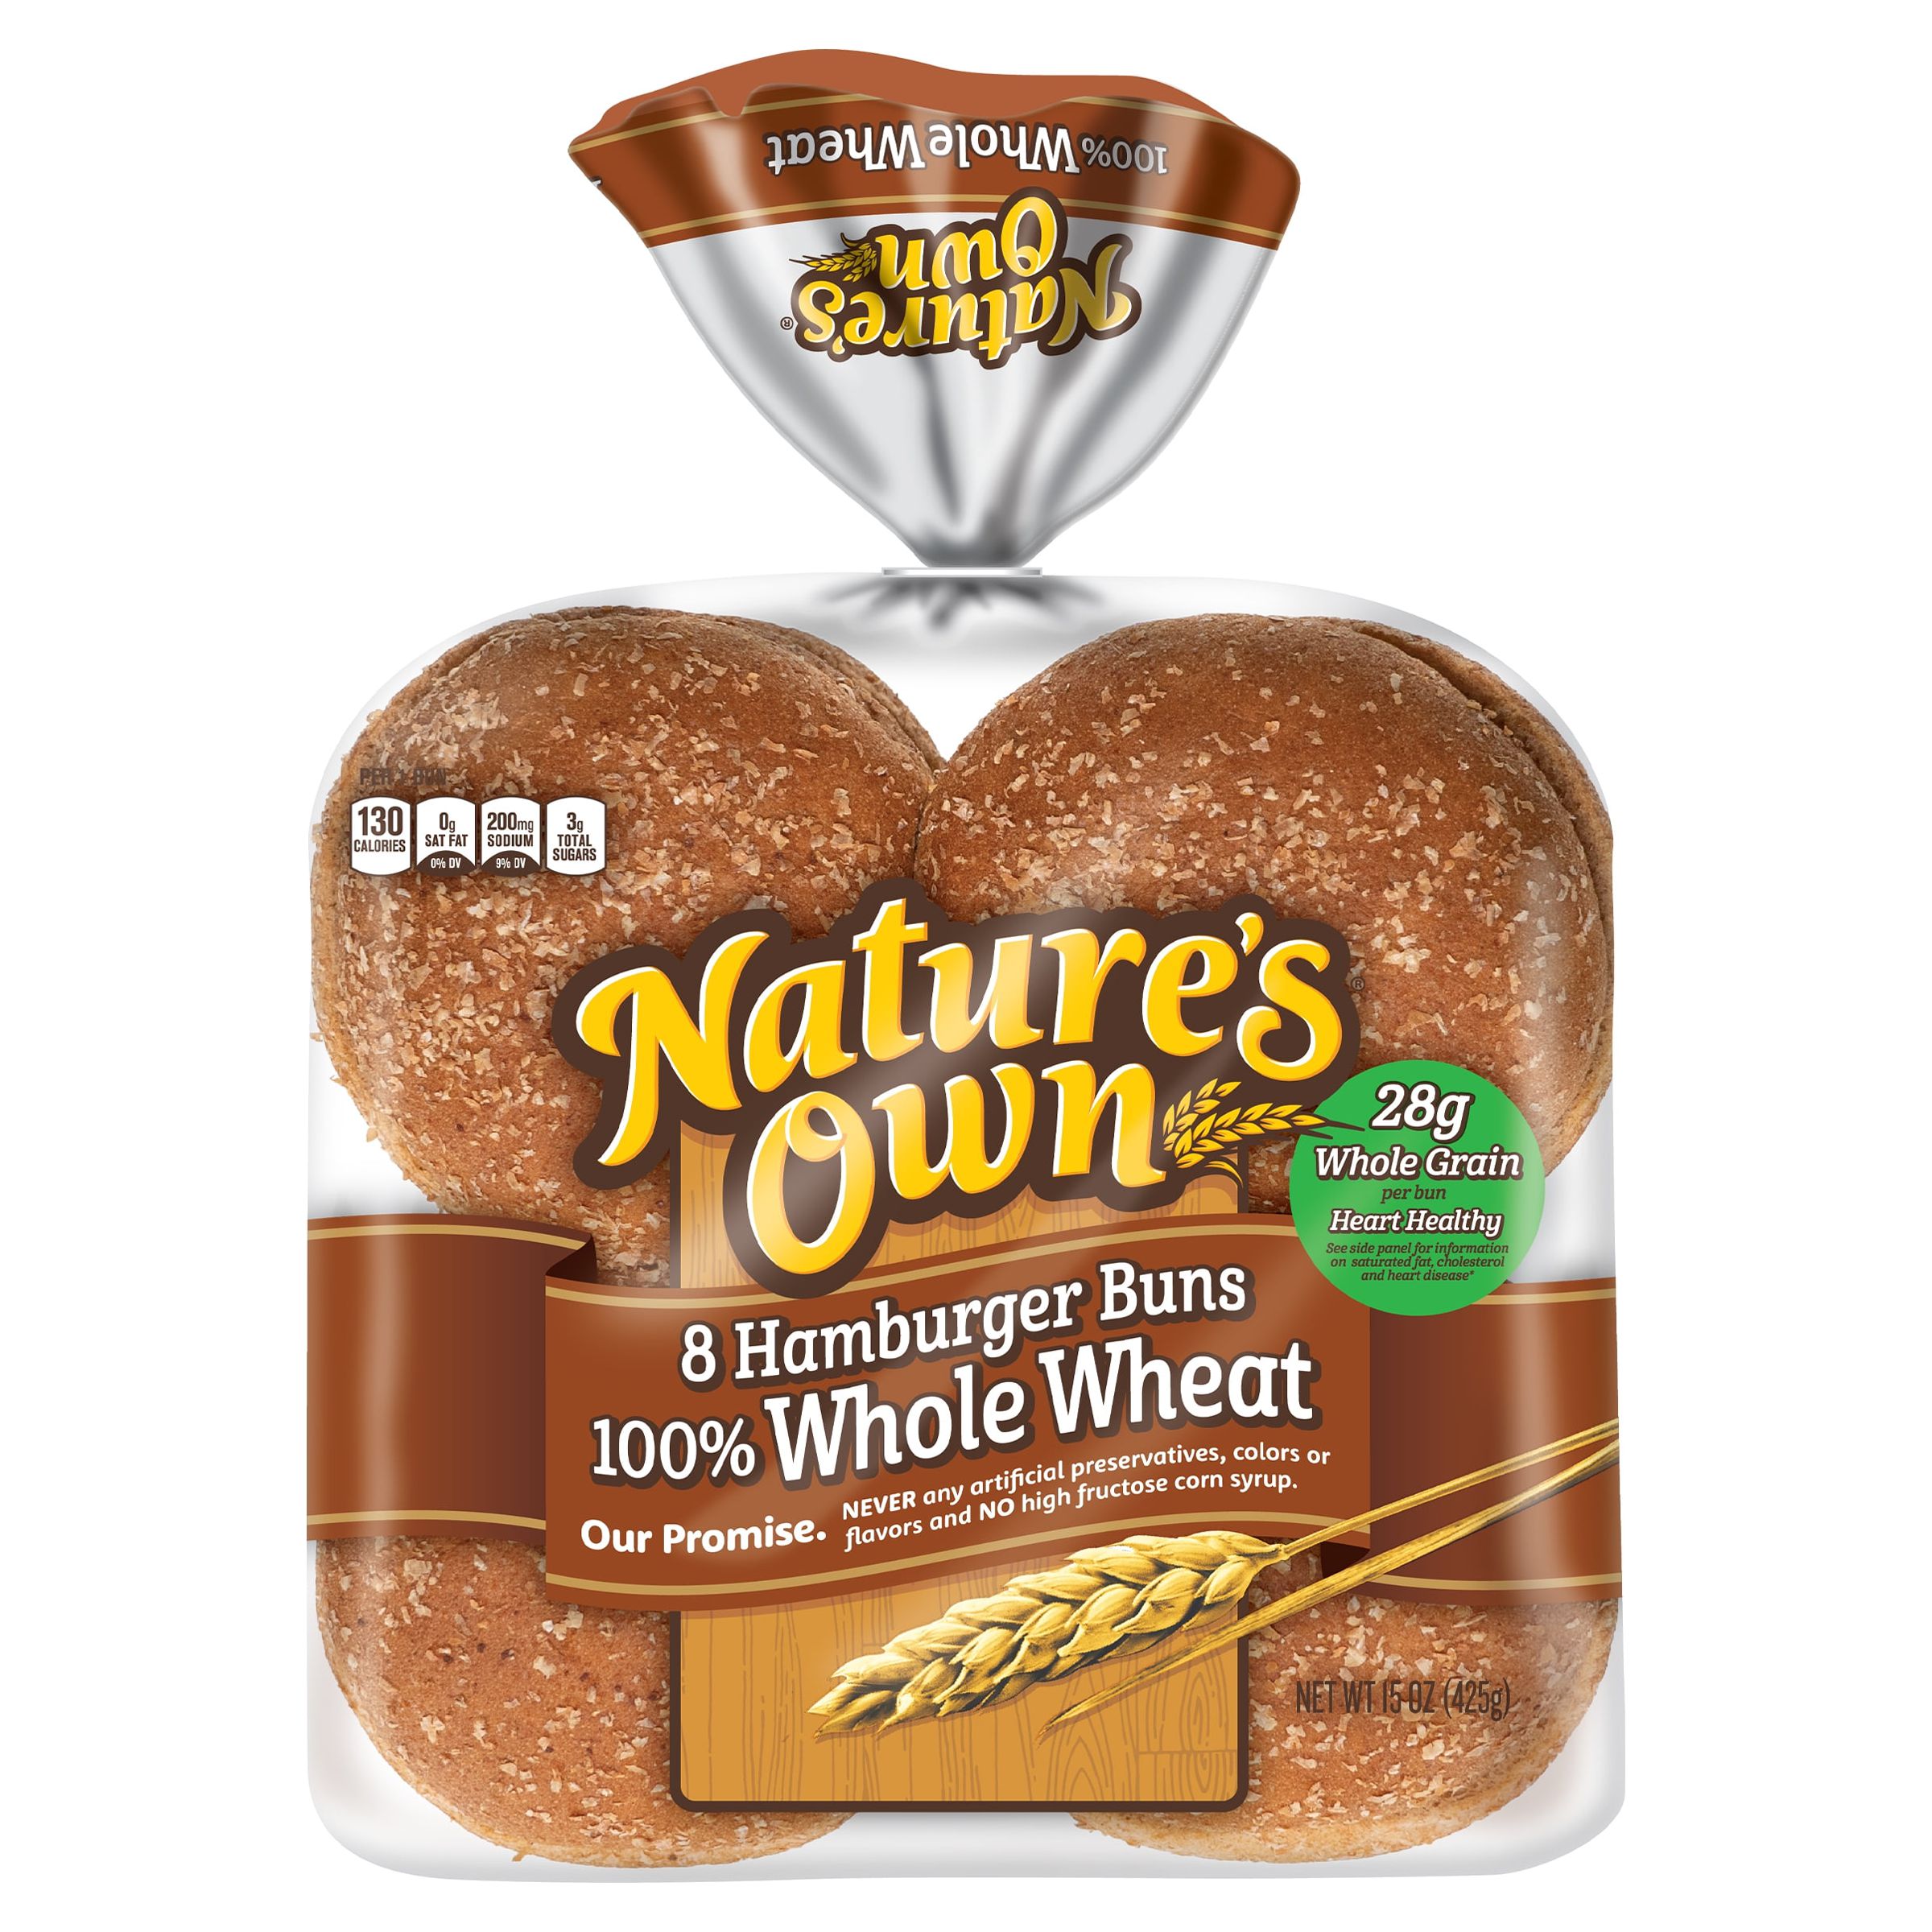 Nature's Own 100% Whole Wheat Hamburger Buns, 15 oz, 8 Count - image 1 of 10